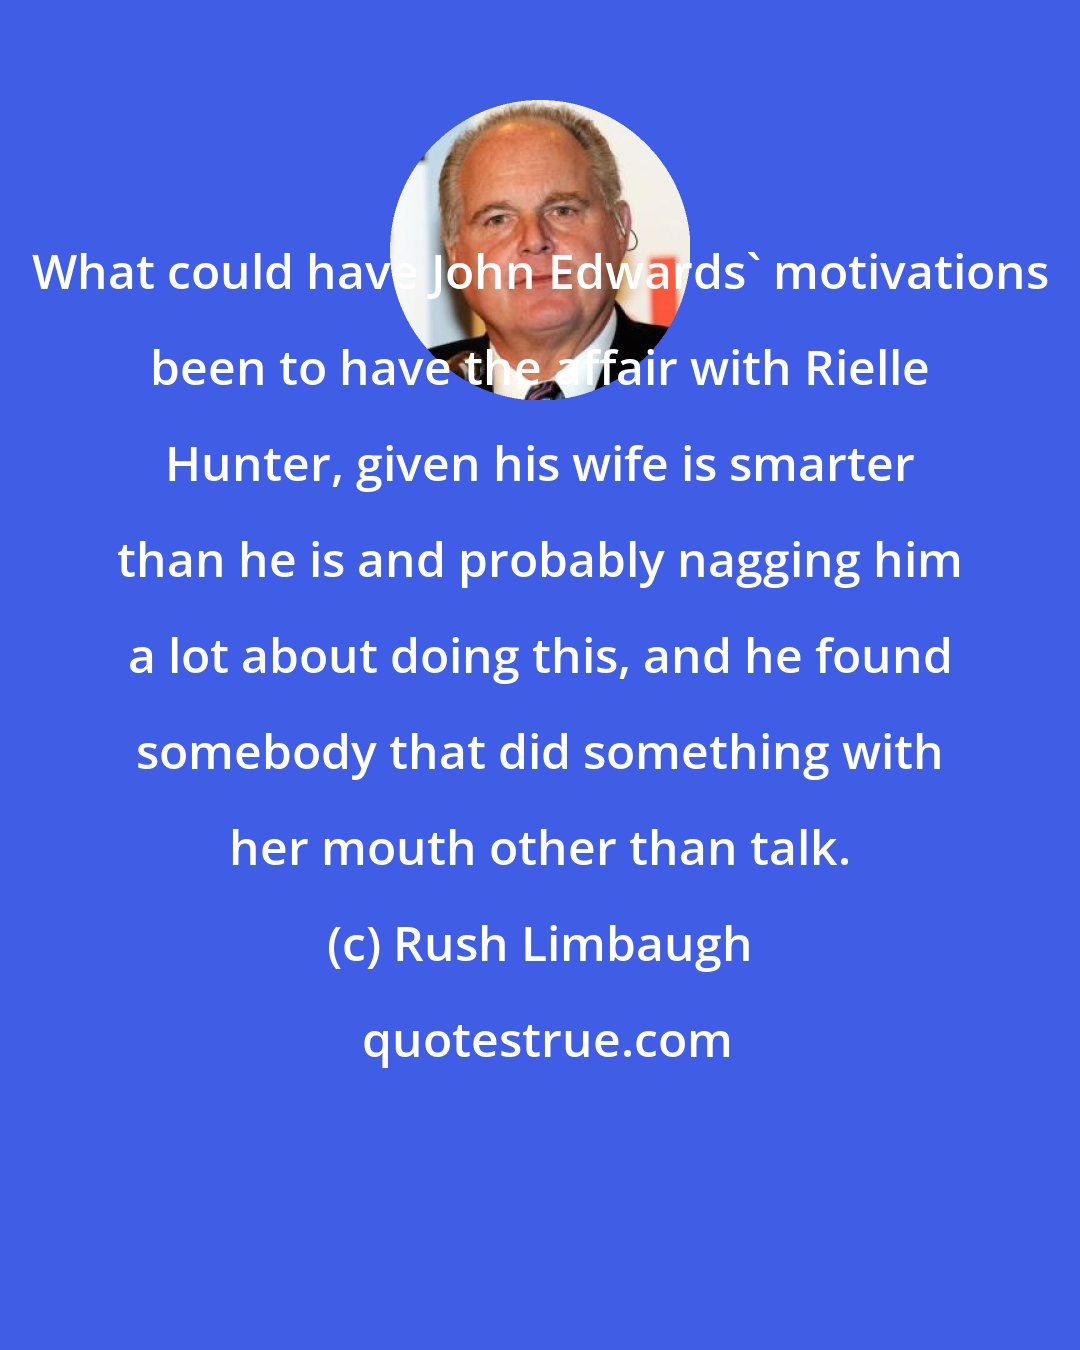 Rush Limbaugh: What could have John Edwards' motivations been to have the affair with Rielle Hunter, given his wife is smarter than he is and probably nagging him a lot about doing this, and he found somebody that did something with her mouth other than talk.